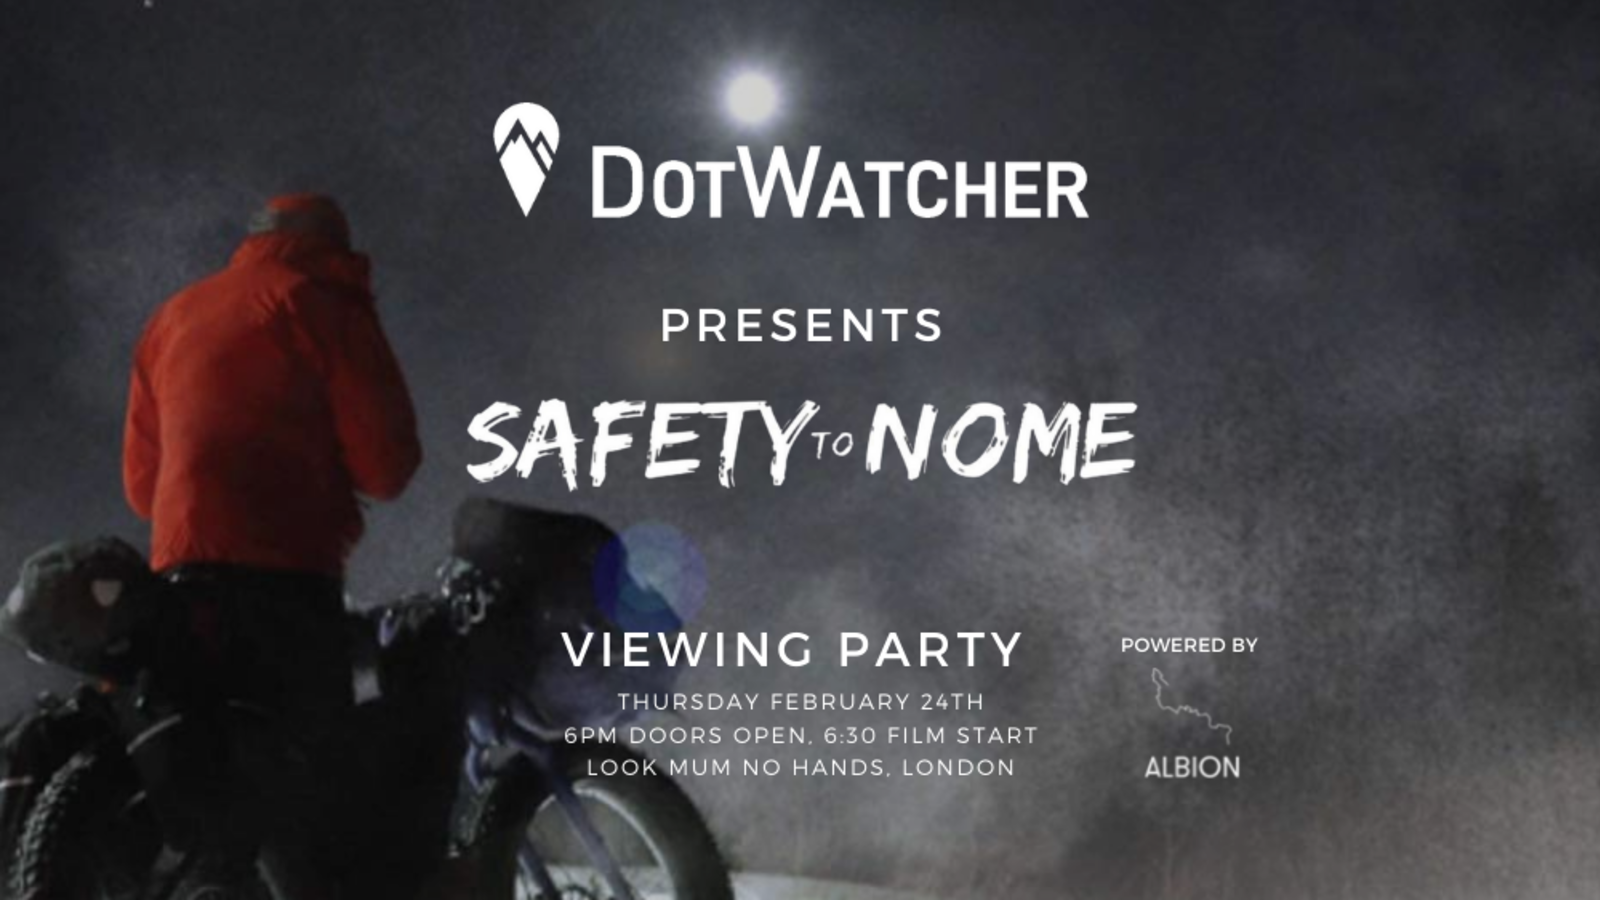 DotWatcher Viewing Party - Safety to Nome